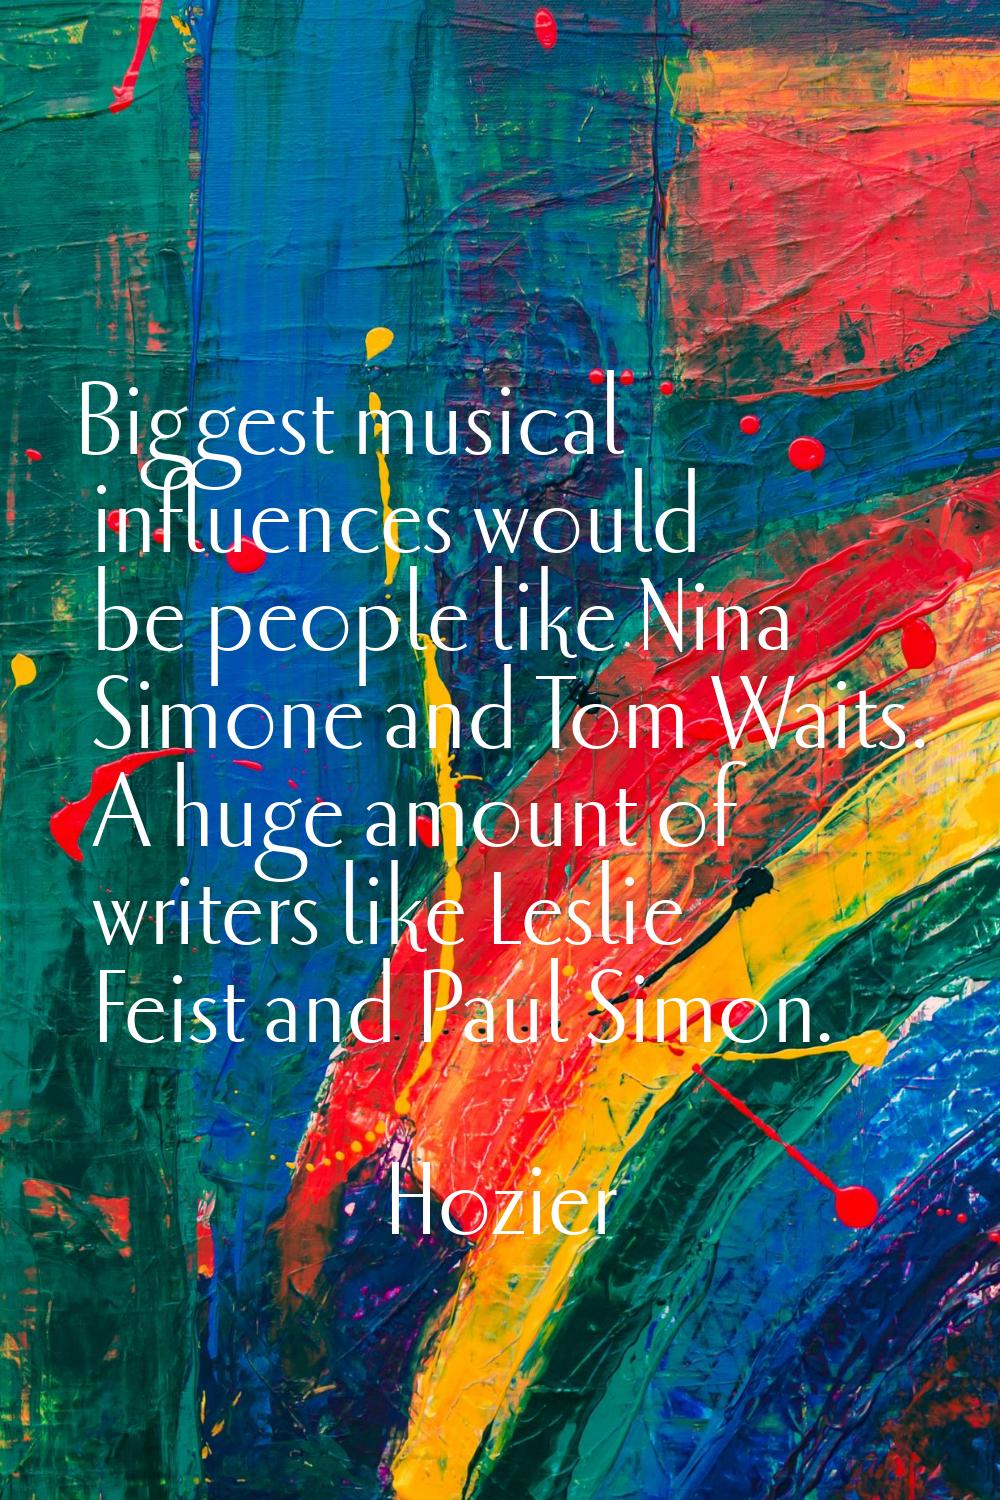 Biggest musical influences would be people like Nina Simone and Tom Waits. A huge amount of writers